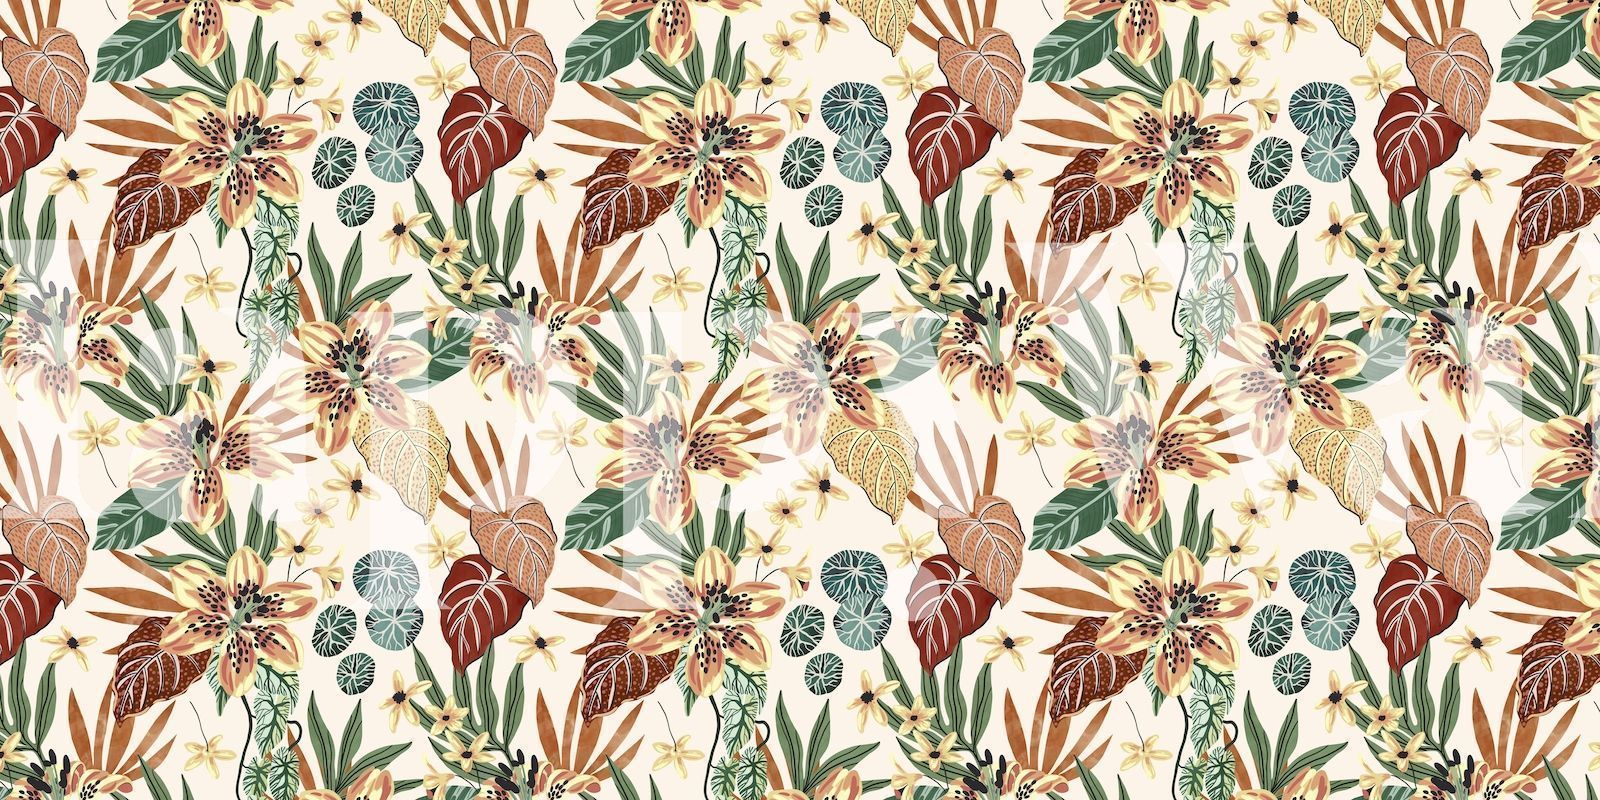 A floral pattern with a mix of leaves, flowers and fruits - Jungle